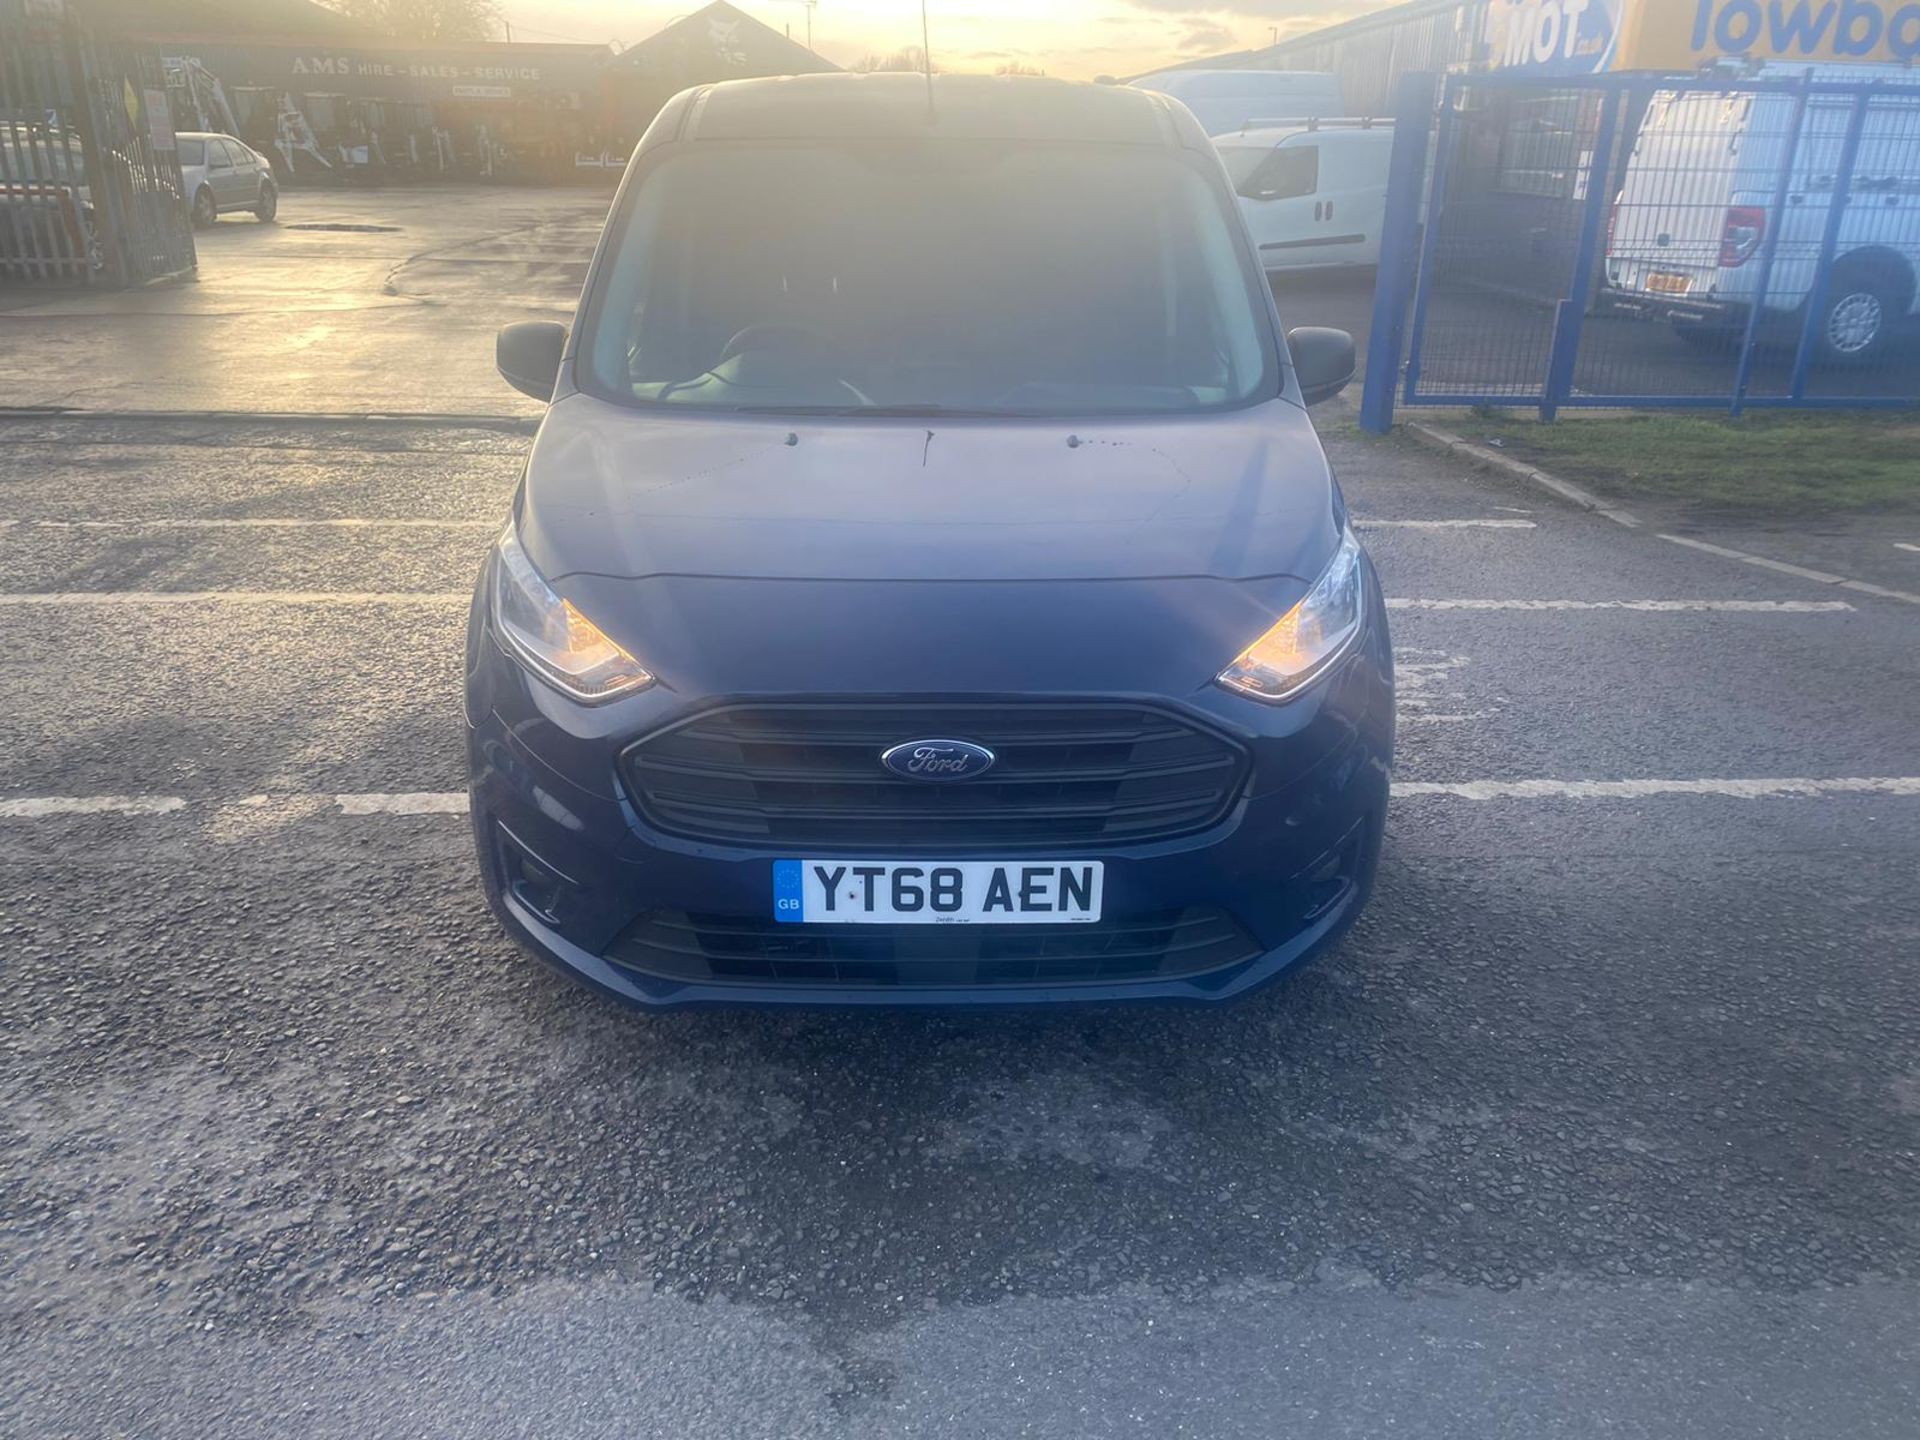 2018 68 FORD TRANSIT CONNECT TREND LWB PANEL VAN - 3 SEATS - NEWER SHAPE - AIR CON - Image 2 of 9